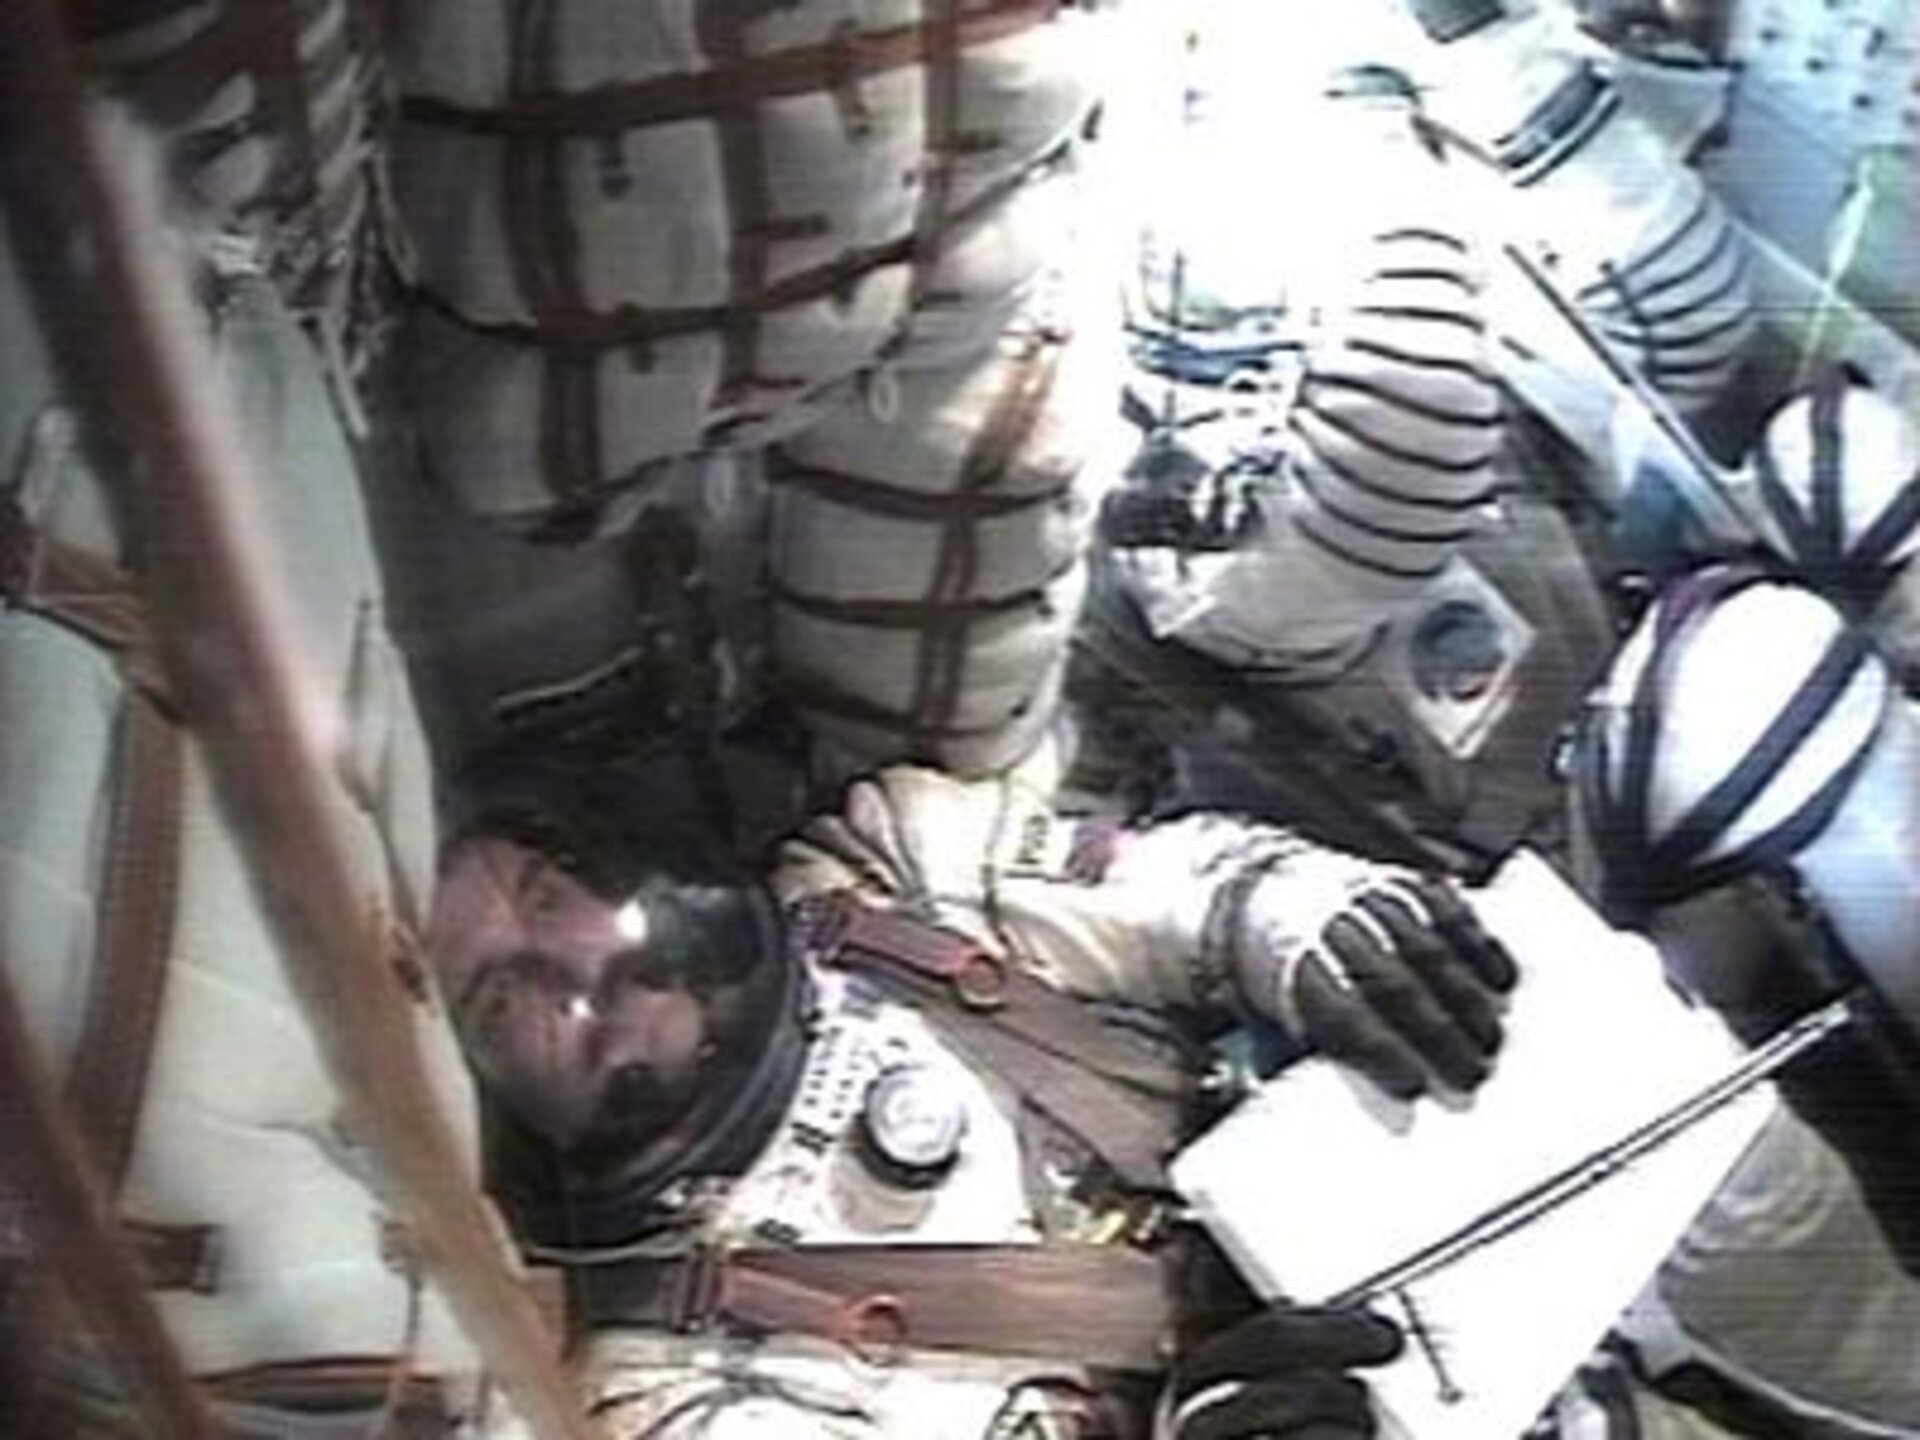 Inside the Soyuz capsule a few minutes into the launch